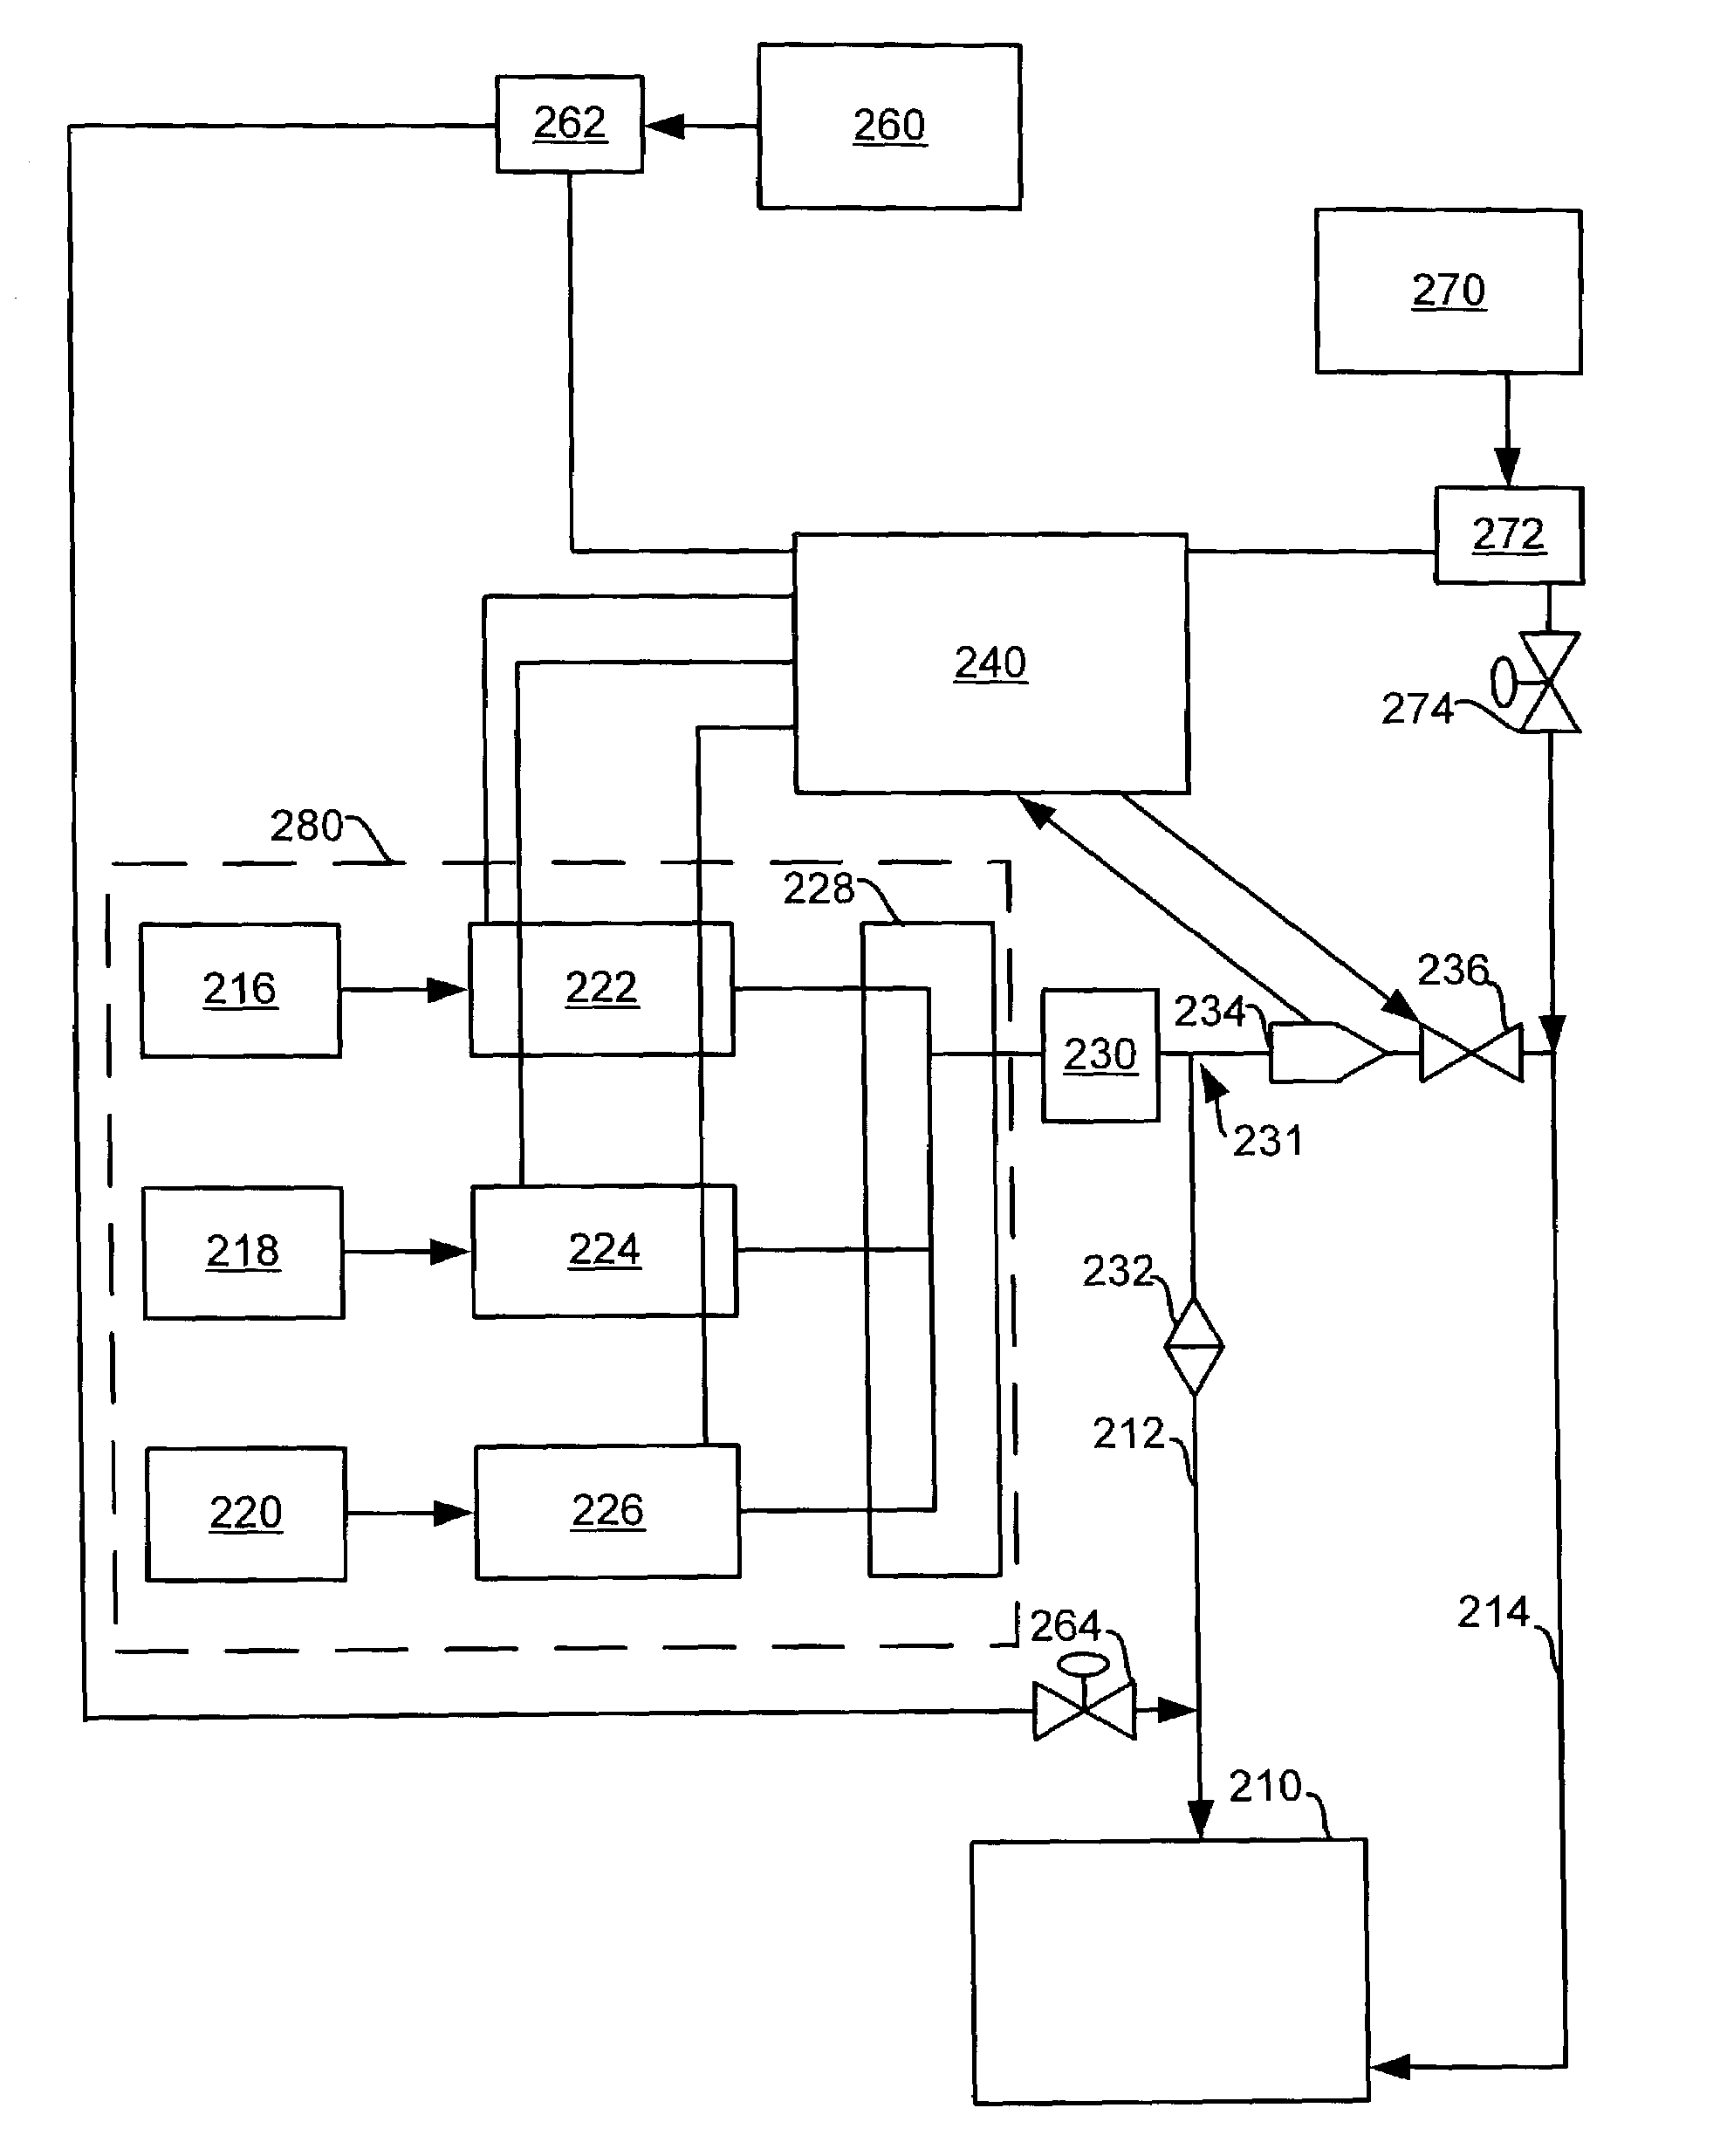 Gas distribution system with tuning gas